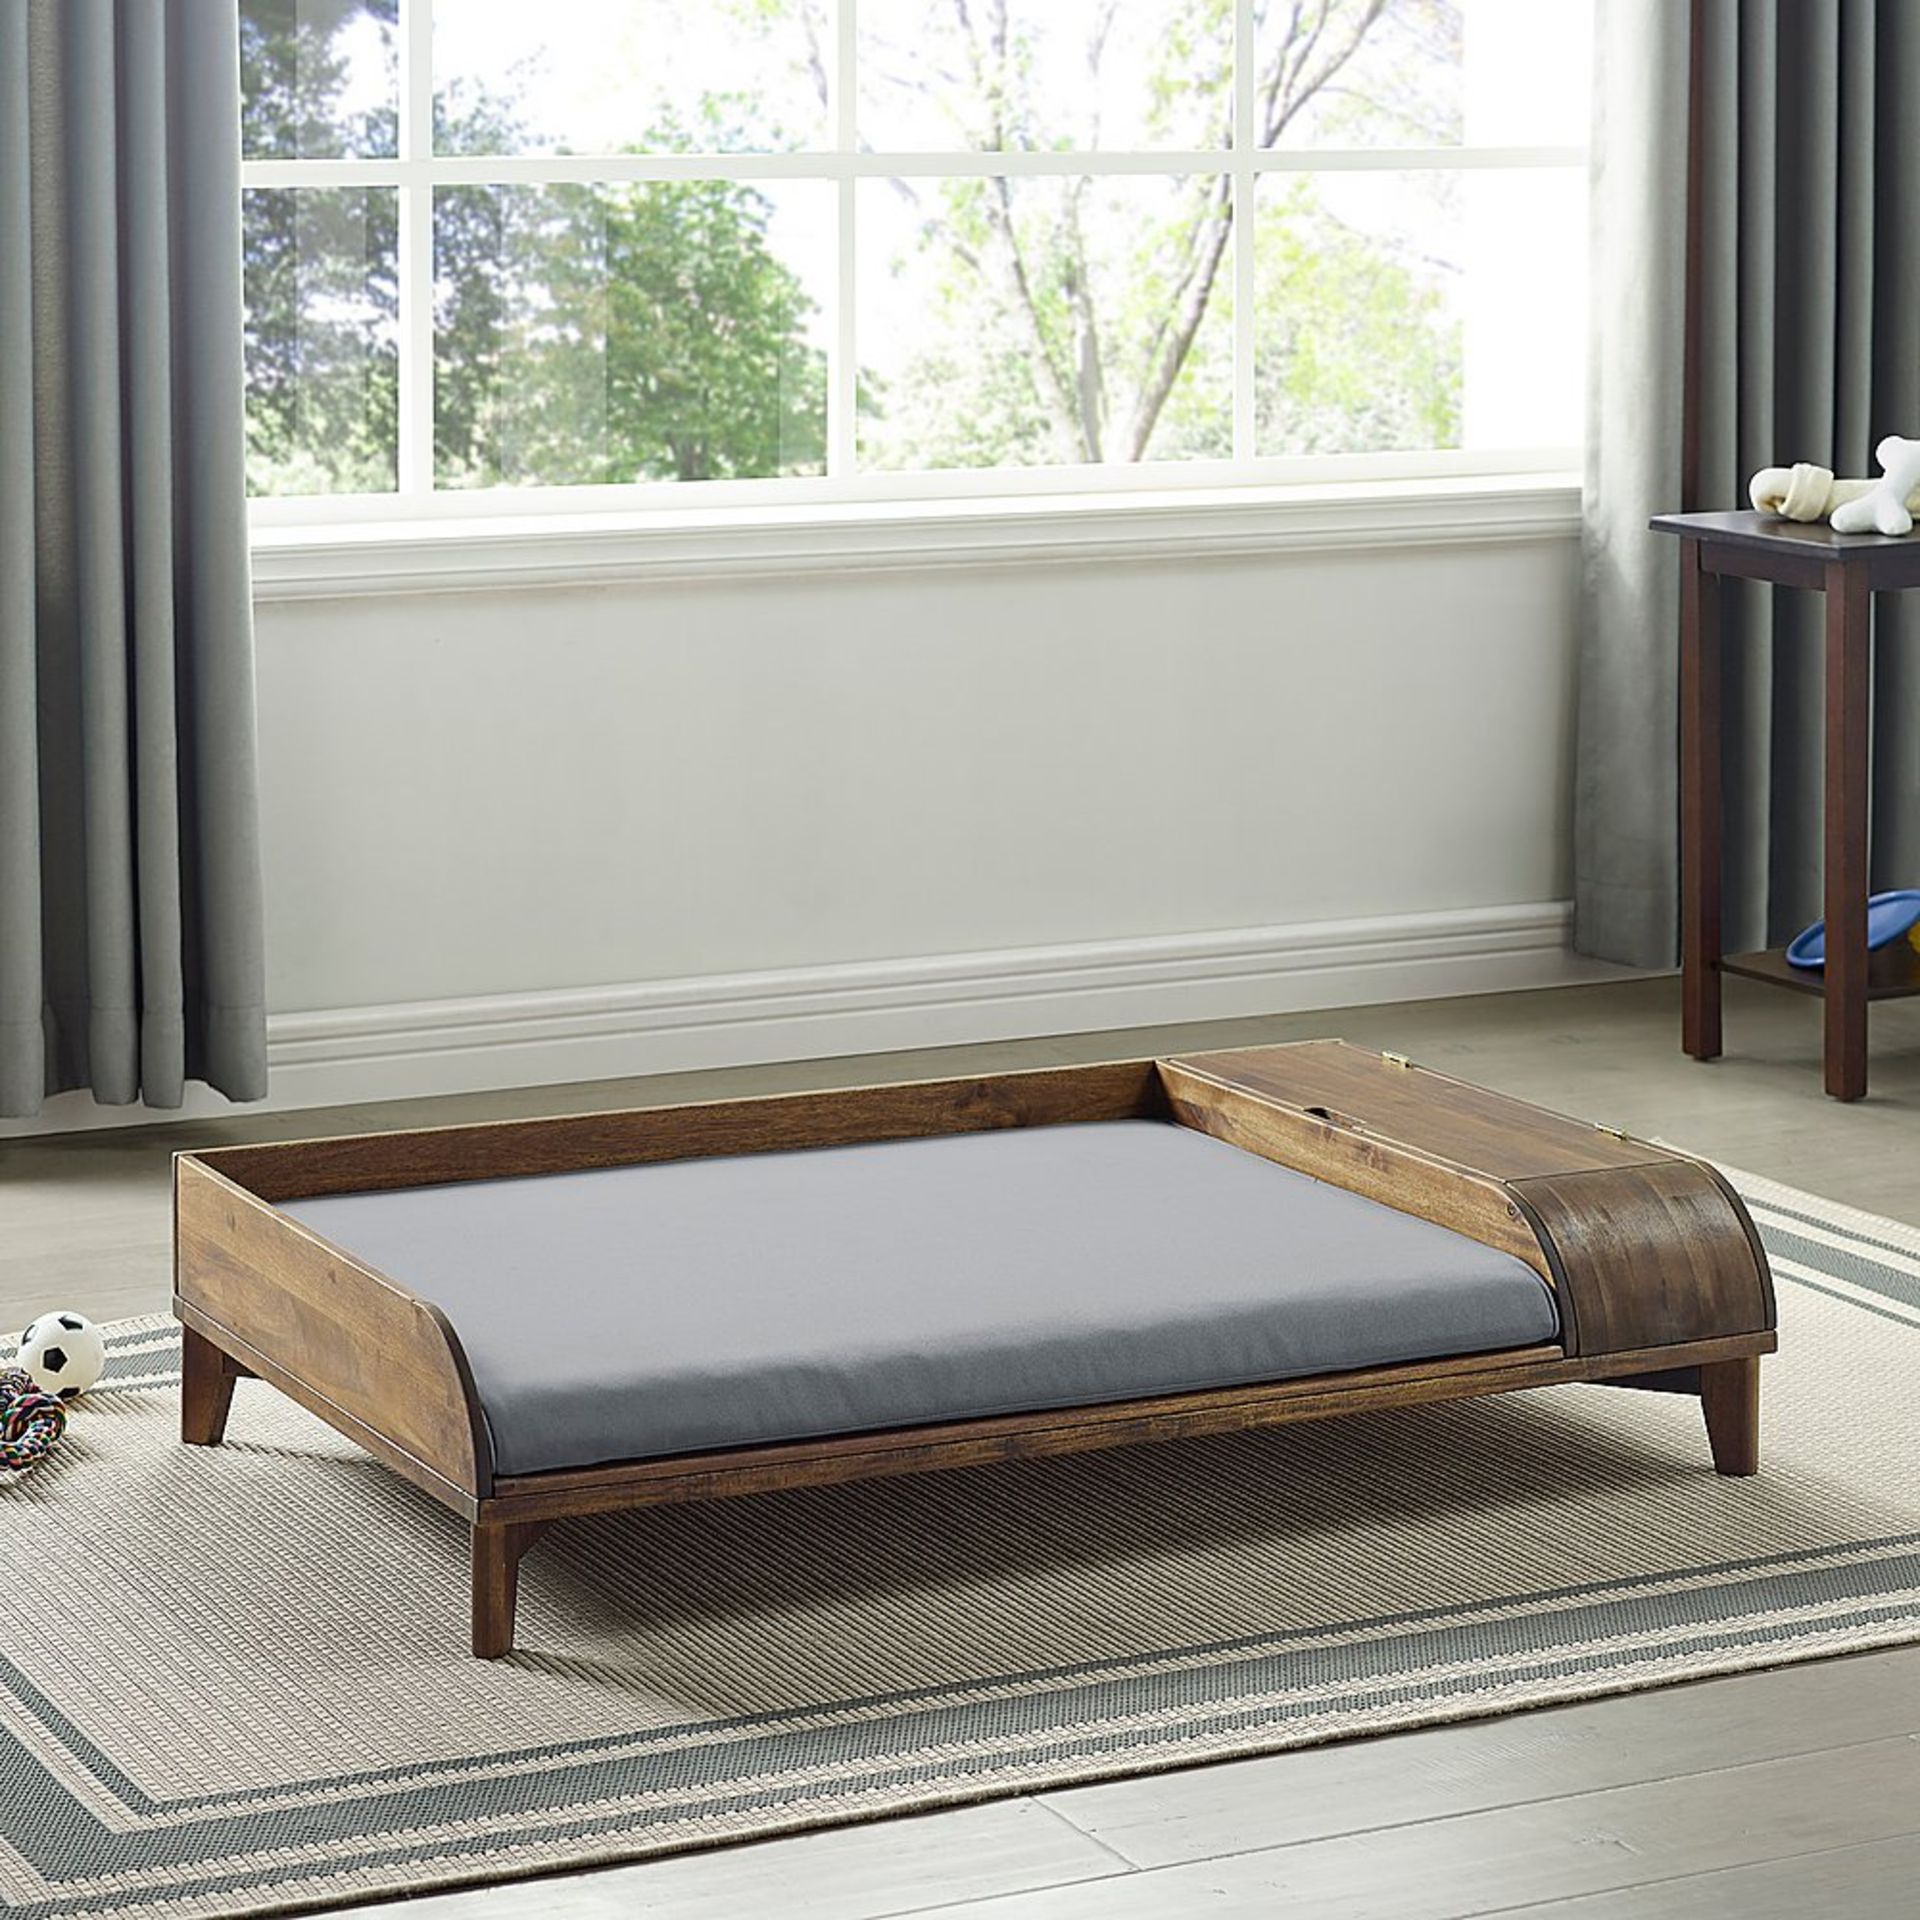 SOLID WOOD STORAGE PED BED WITH CUSHION IN DARK BROWN/GREY - RRP £245